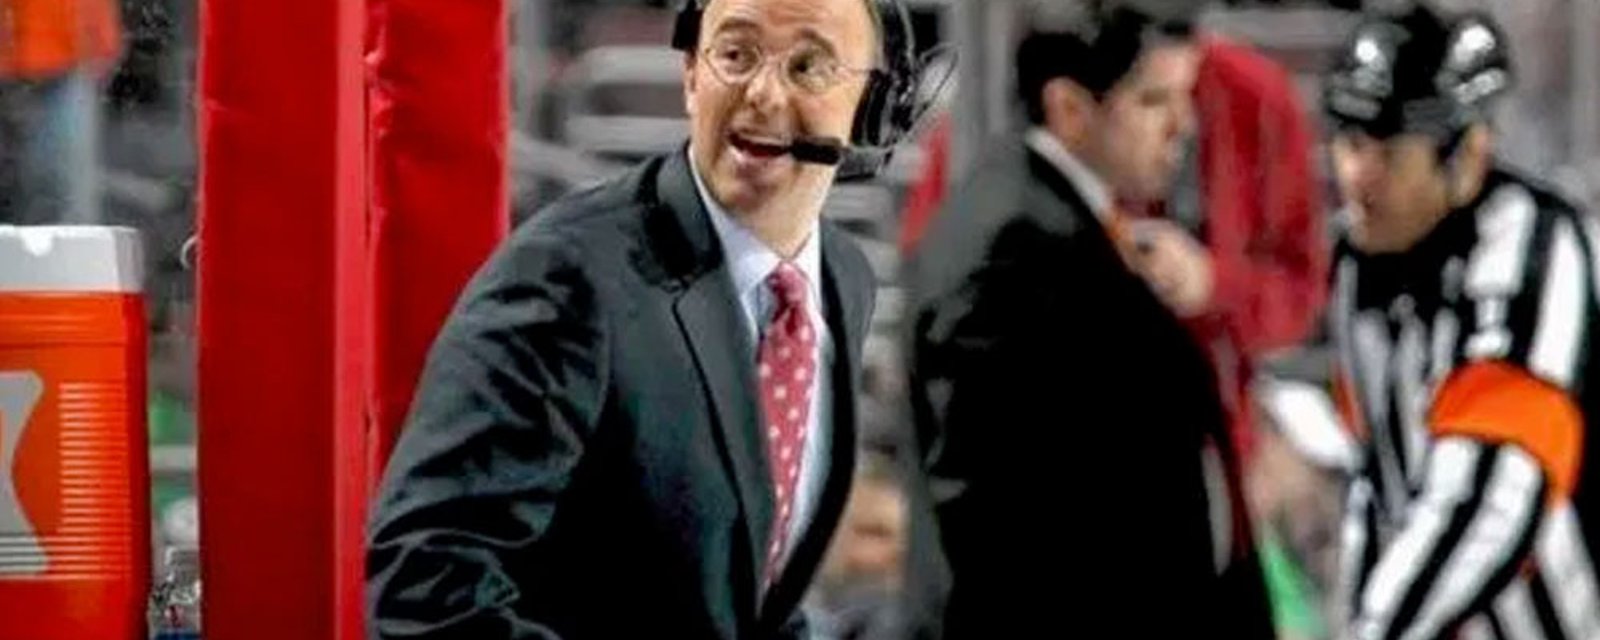 Pierre McGuire refutes reports of his firing at NBC